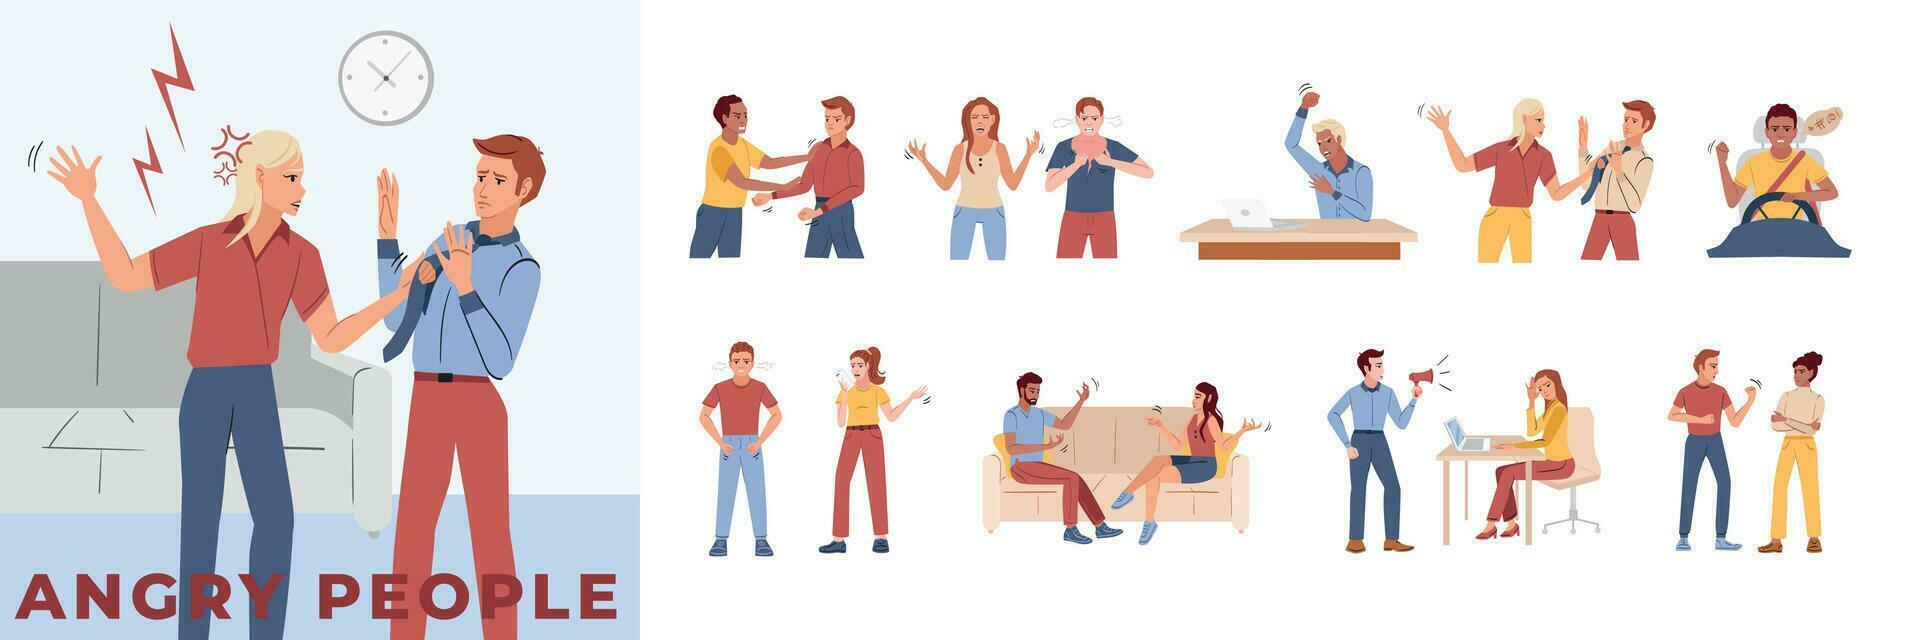 Angry People Compositions Set vector